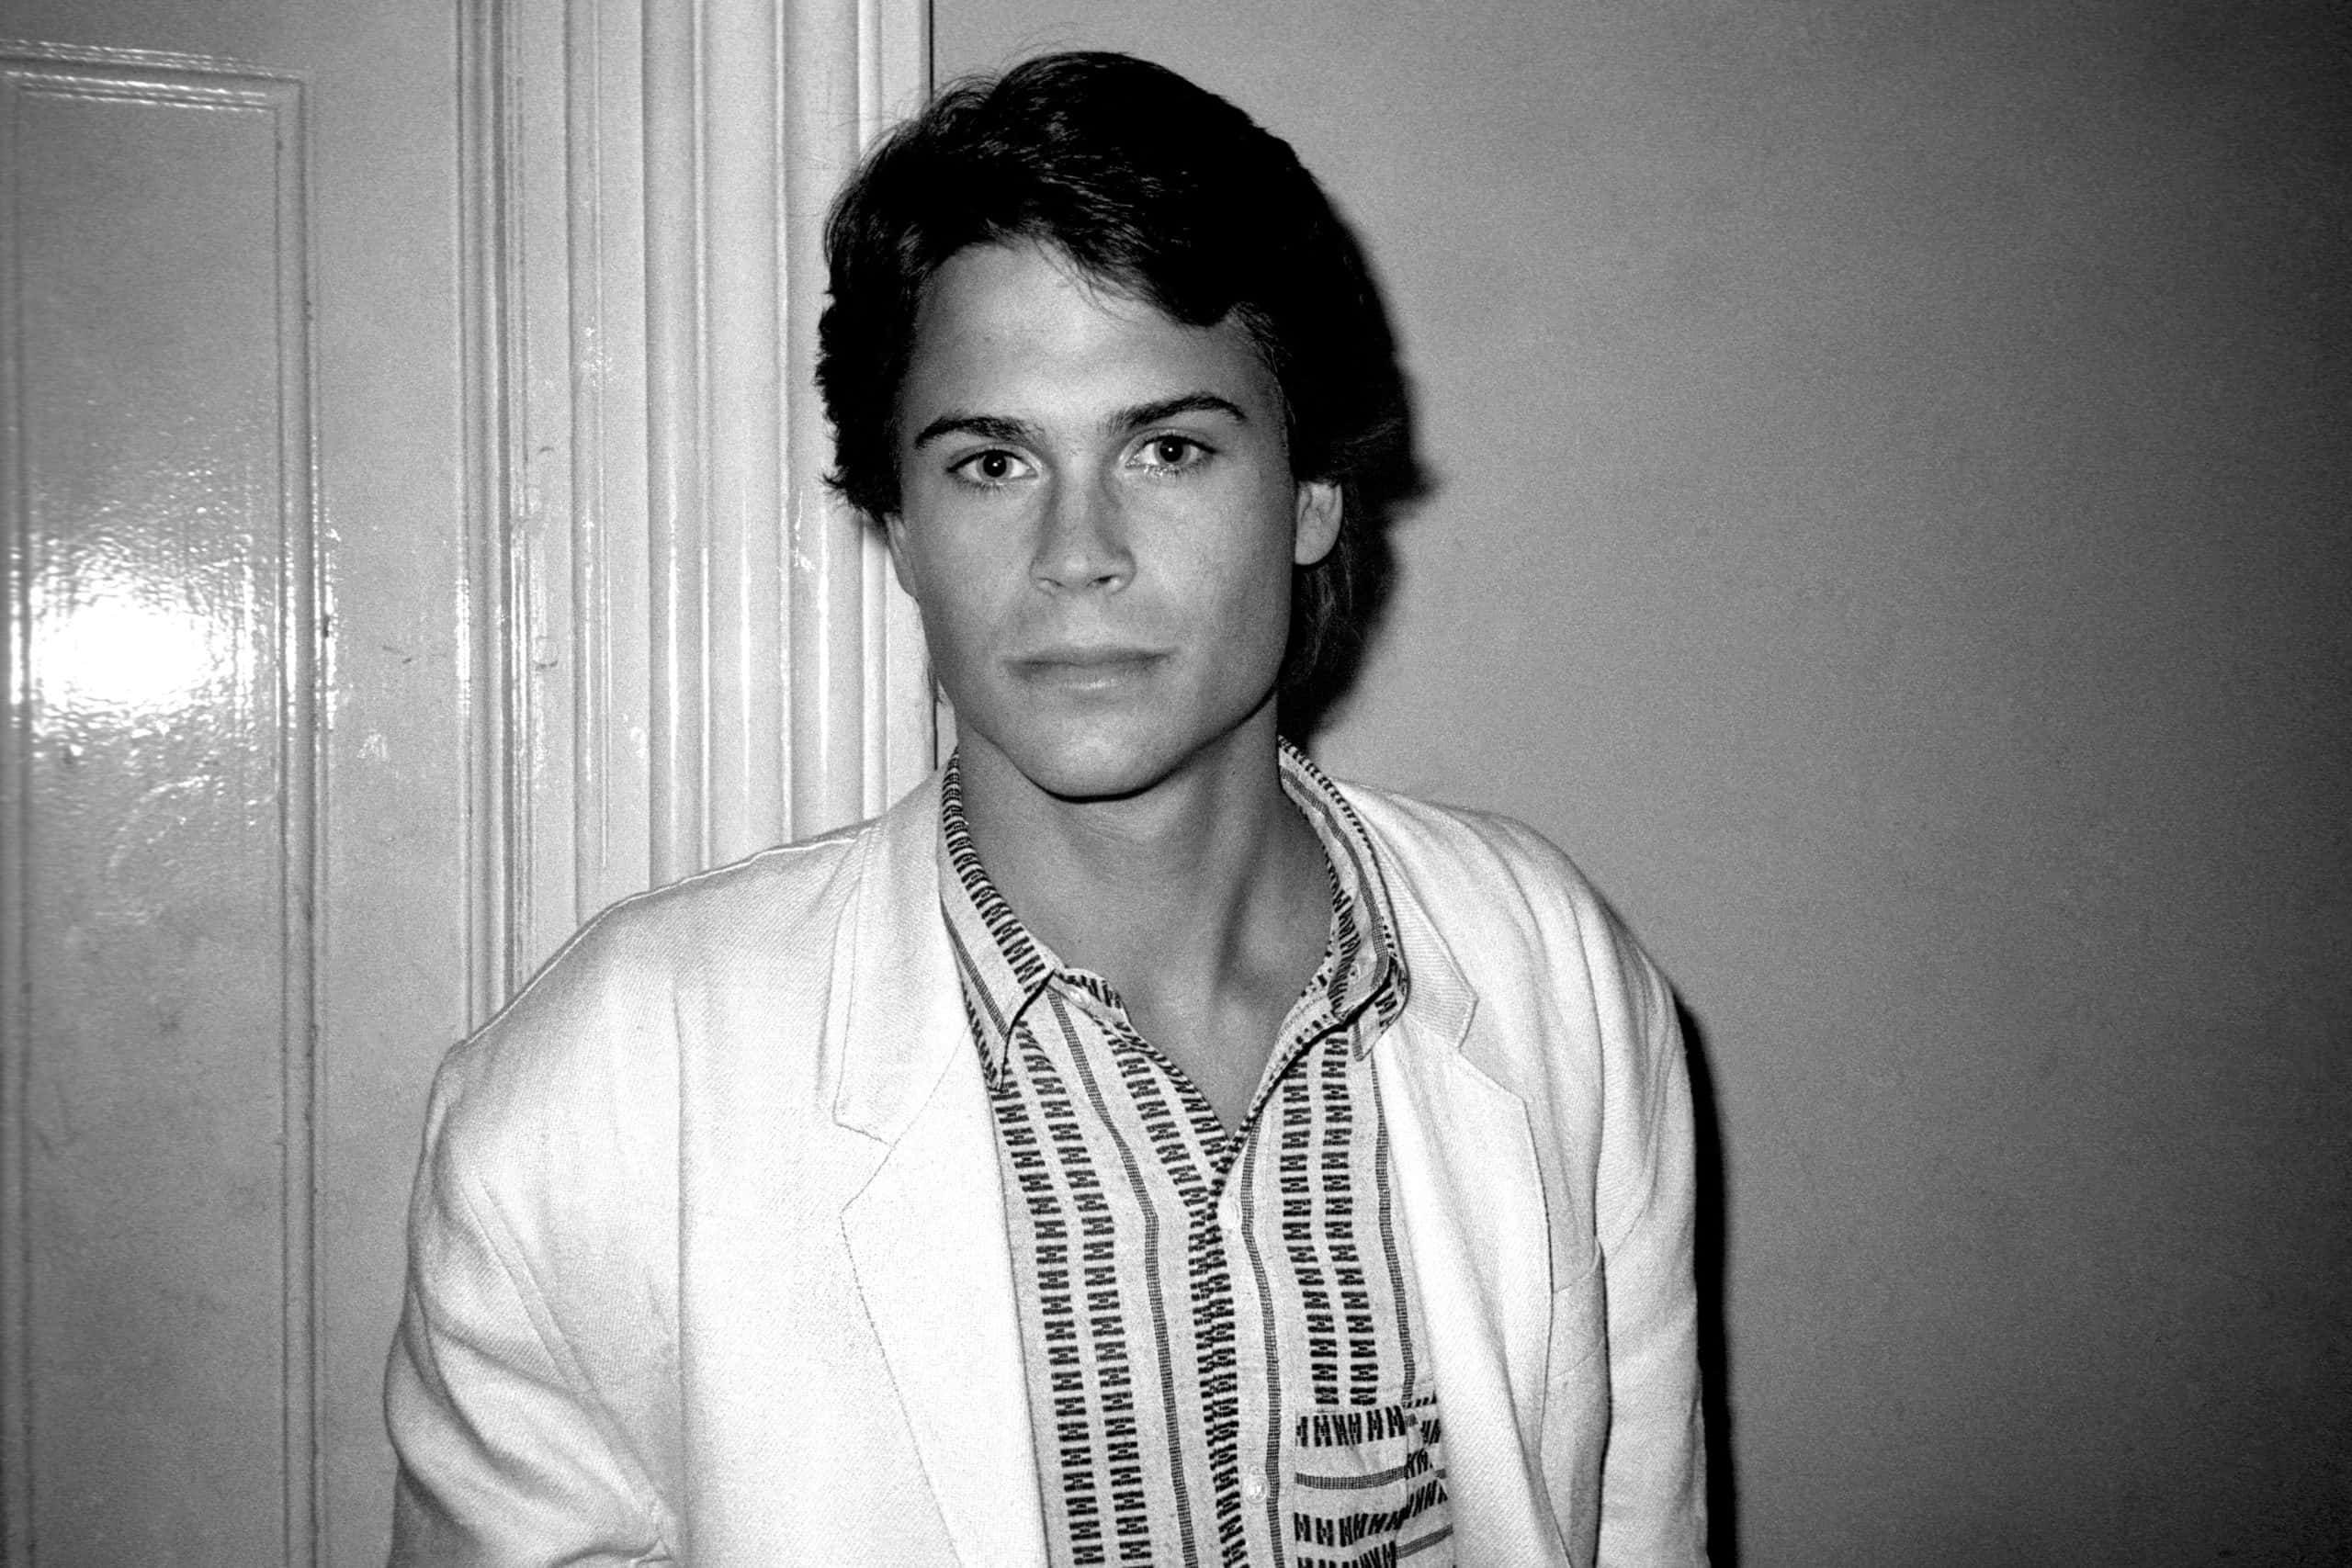 Rob Lowe facts